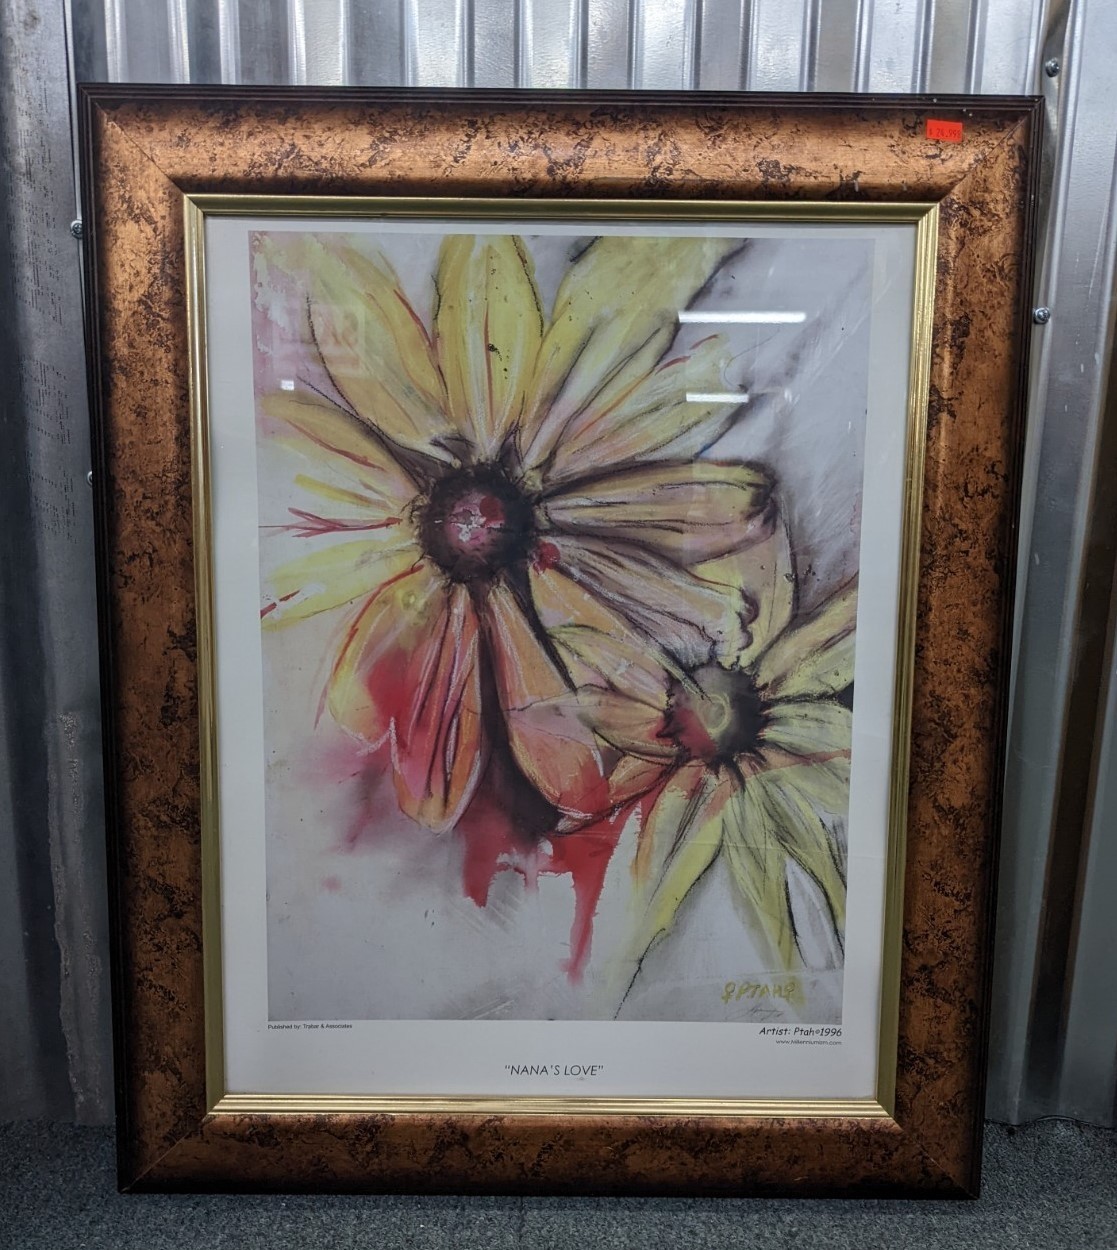 Used "Nana's Love"  with Daisies Framed Print by Ptah